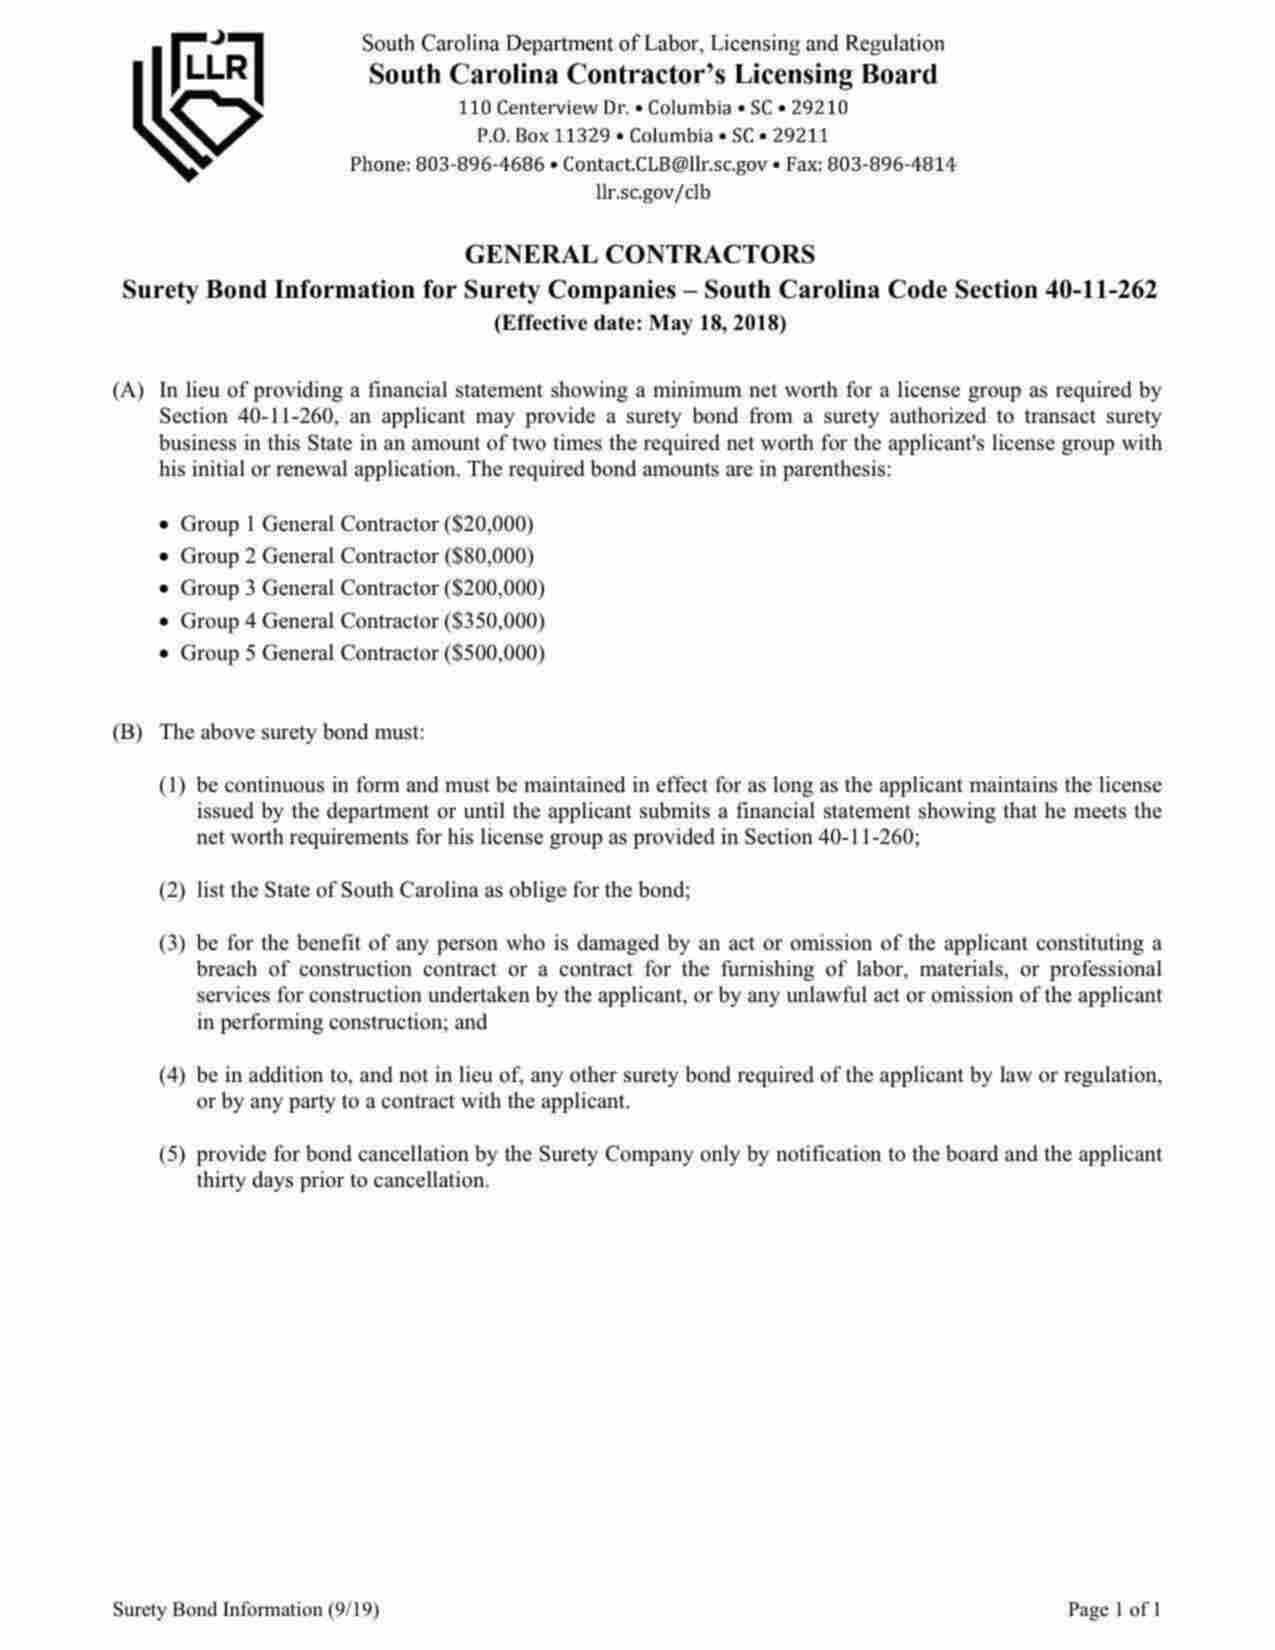 South Carolina General and Mechanical Contractor License Bond Form